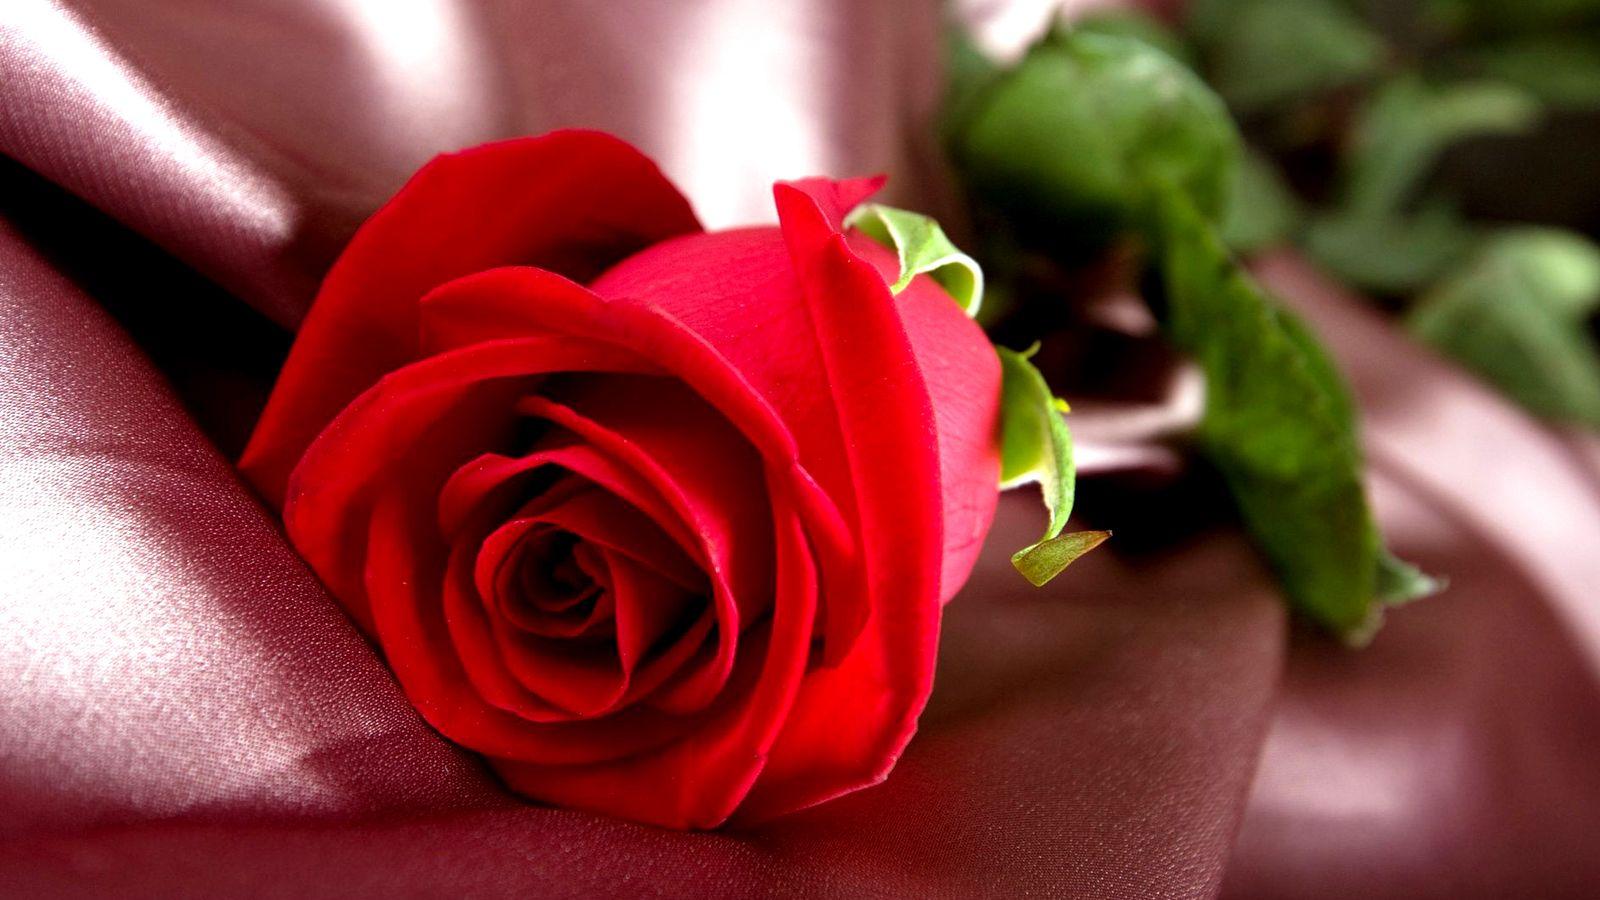 red rose wallpaper HD for love. Full HD Images